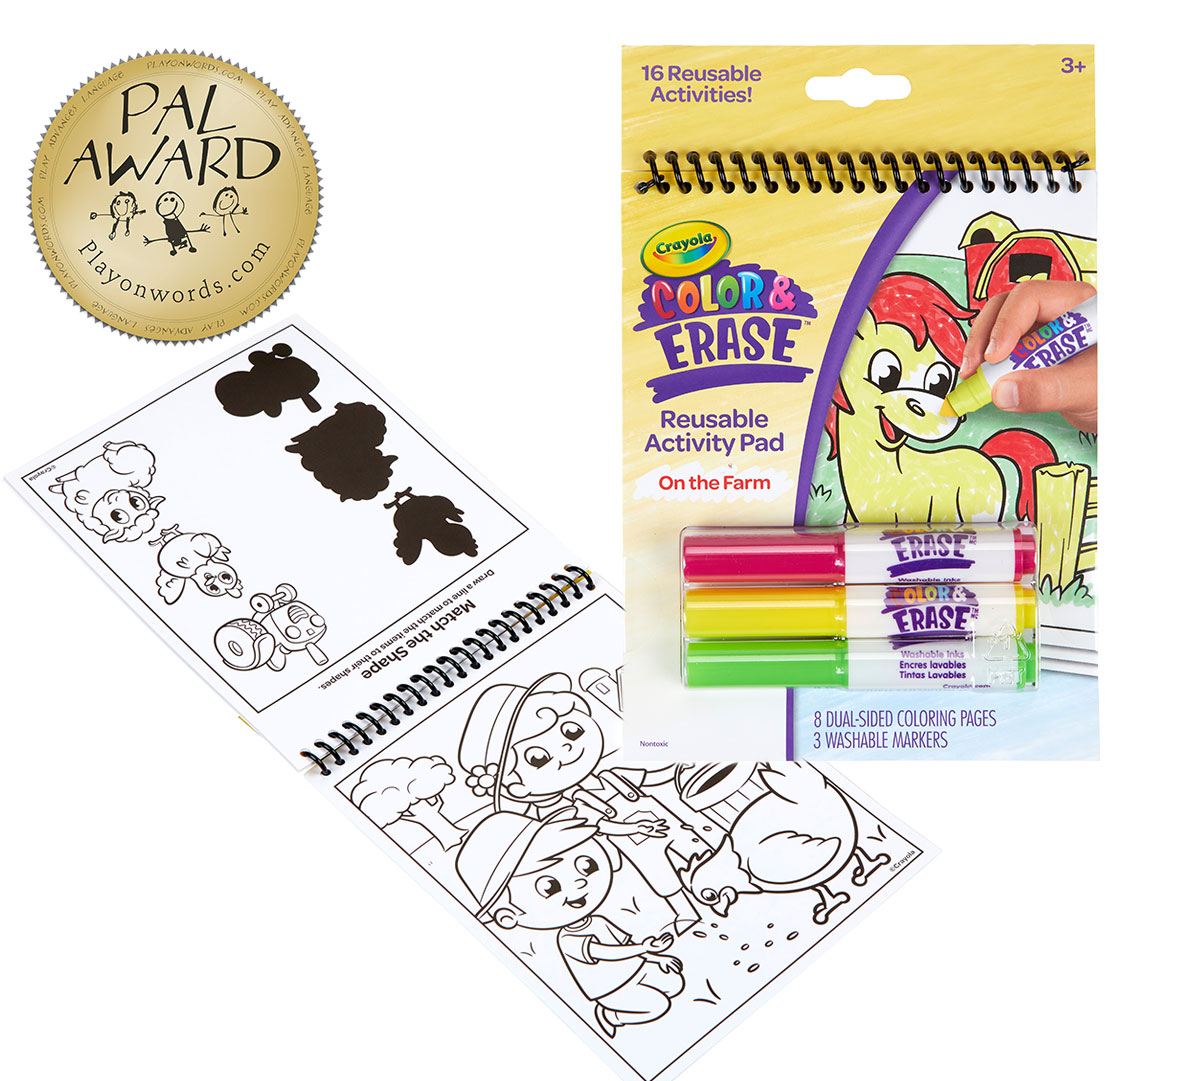 Crayola Ultimate Light Board Less Mess Painting Activity Kit Colour & Erase  Mat - NLI Solutions